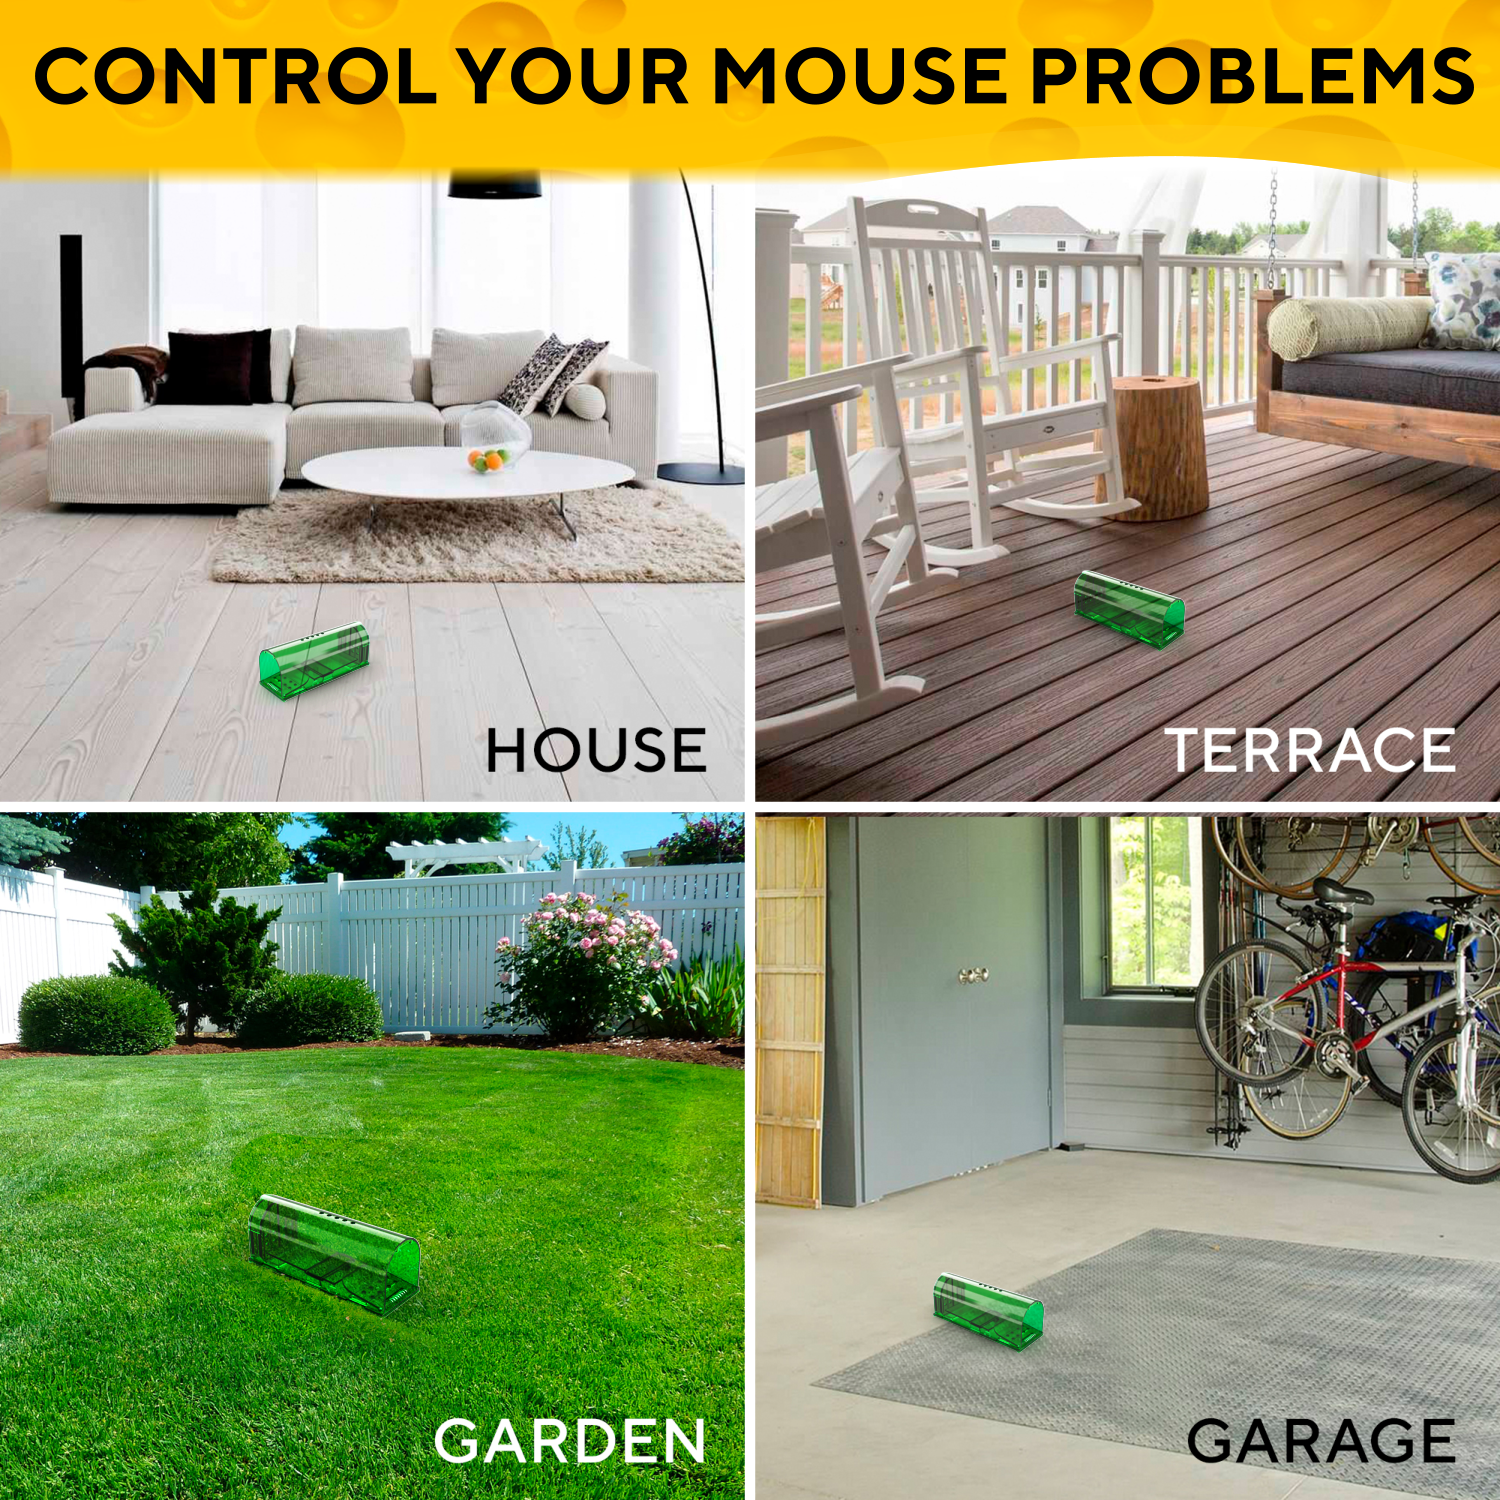 DEJOR Humane Mouse Trap Live Catch Indoor for Home/Outdoor Durable Reusable  No Harm to Mice